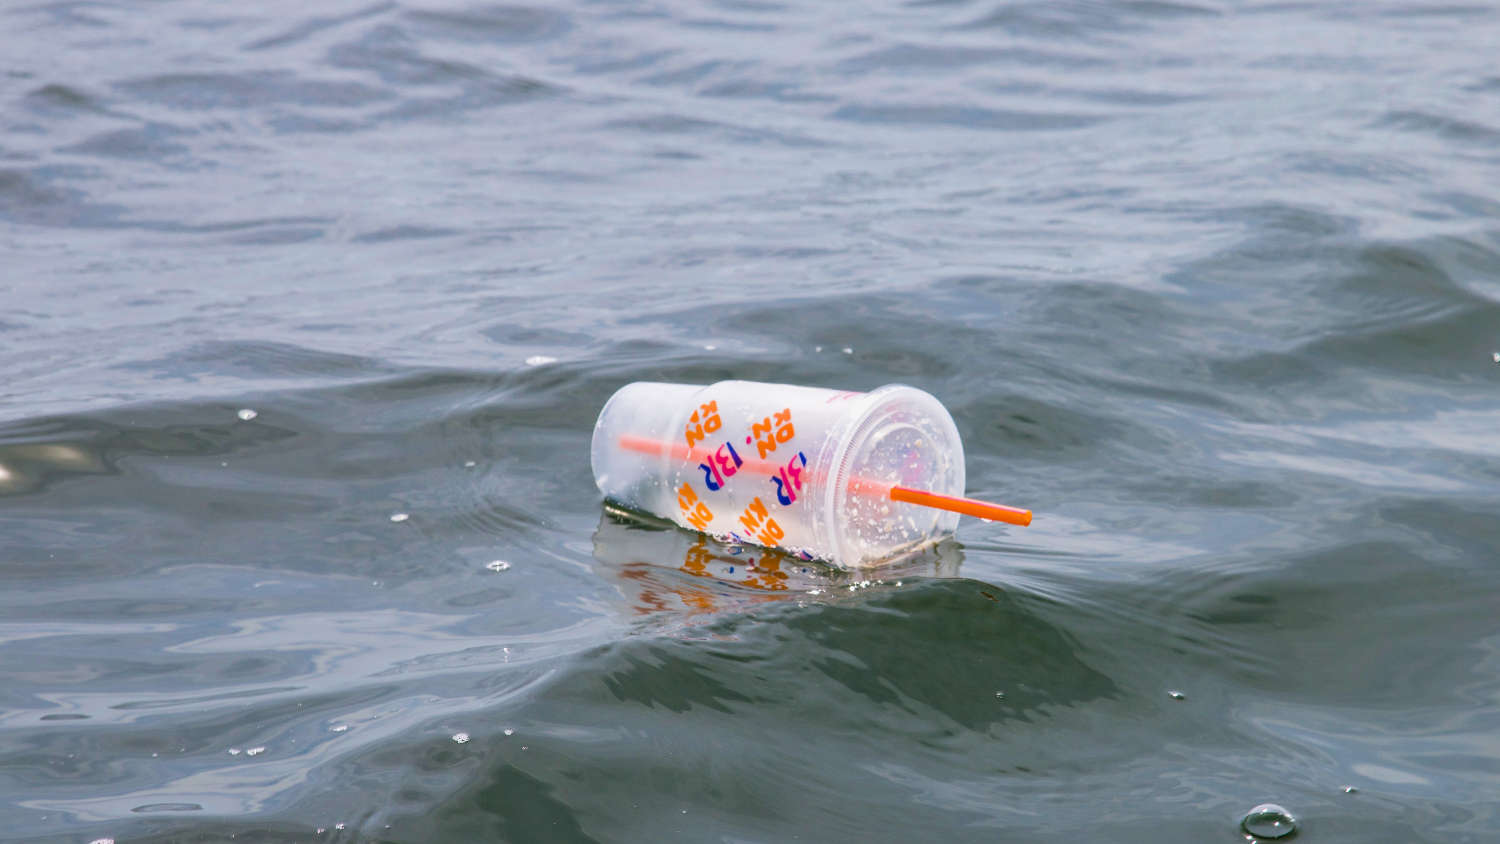 Why Are Plastic Straws Bad for the Environment & Should Be Banned